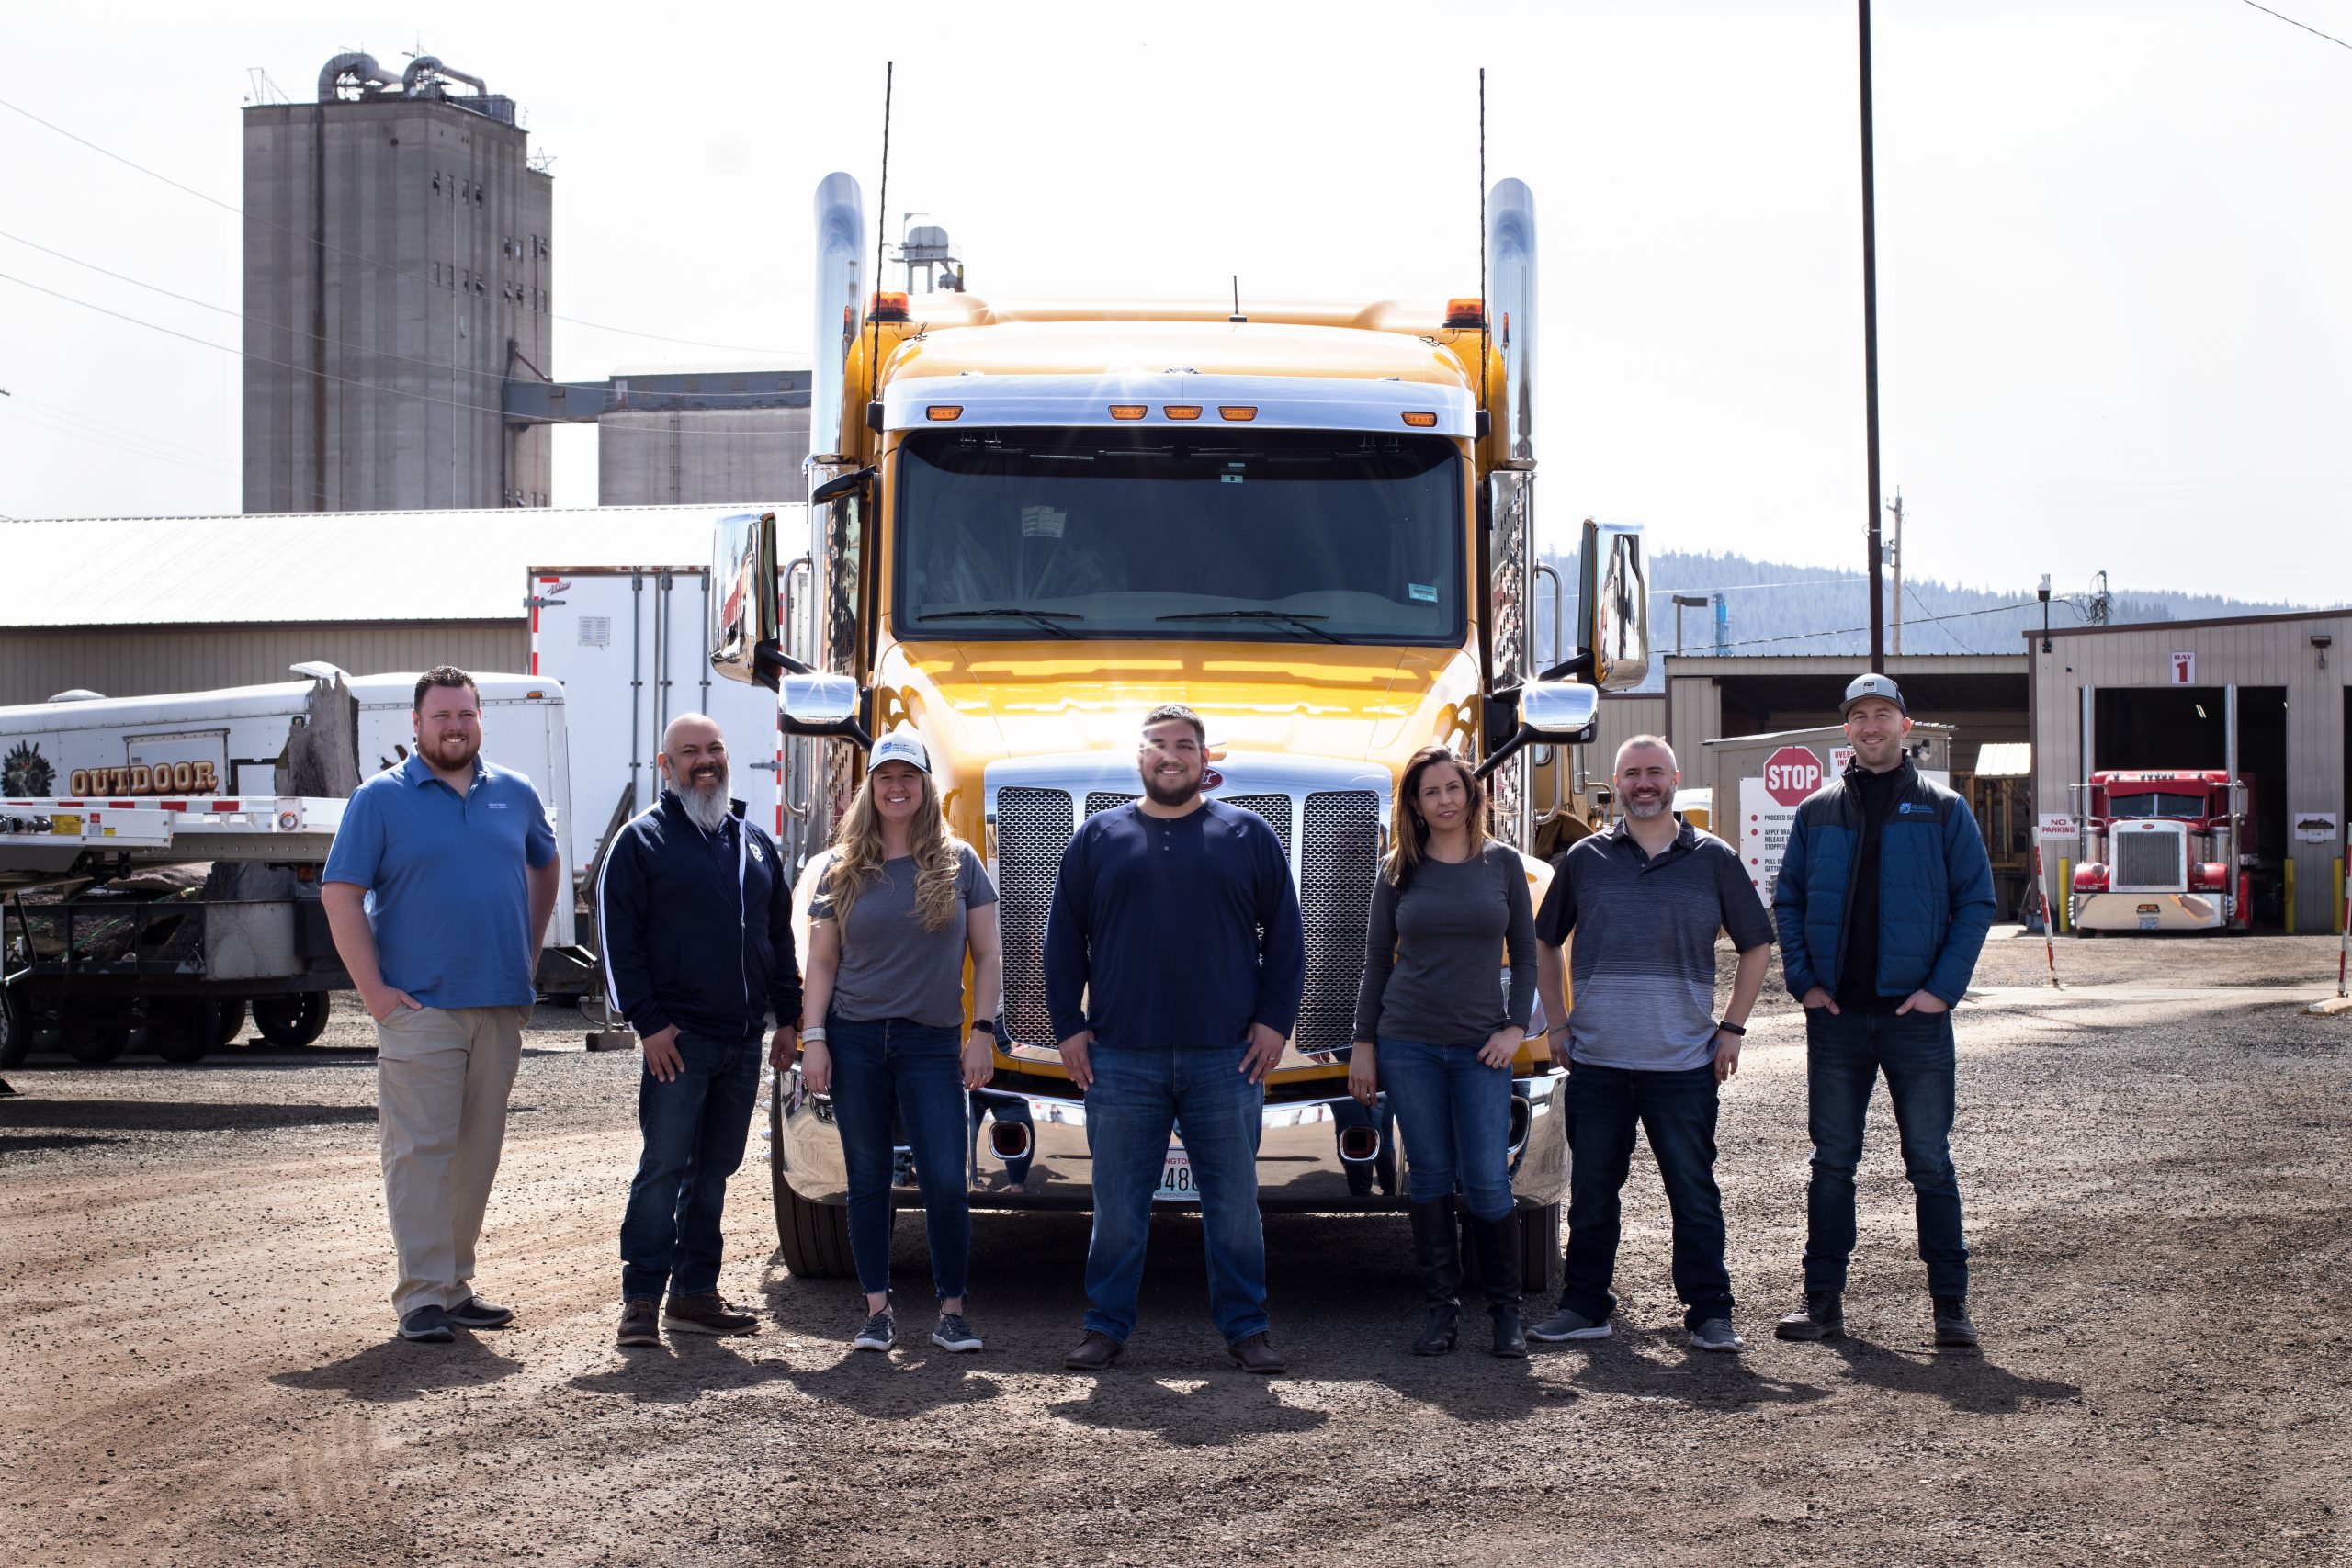 Trucking Team Photo in front of Semi